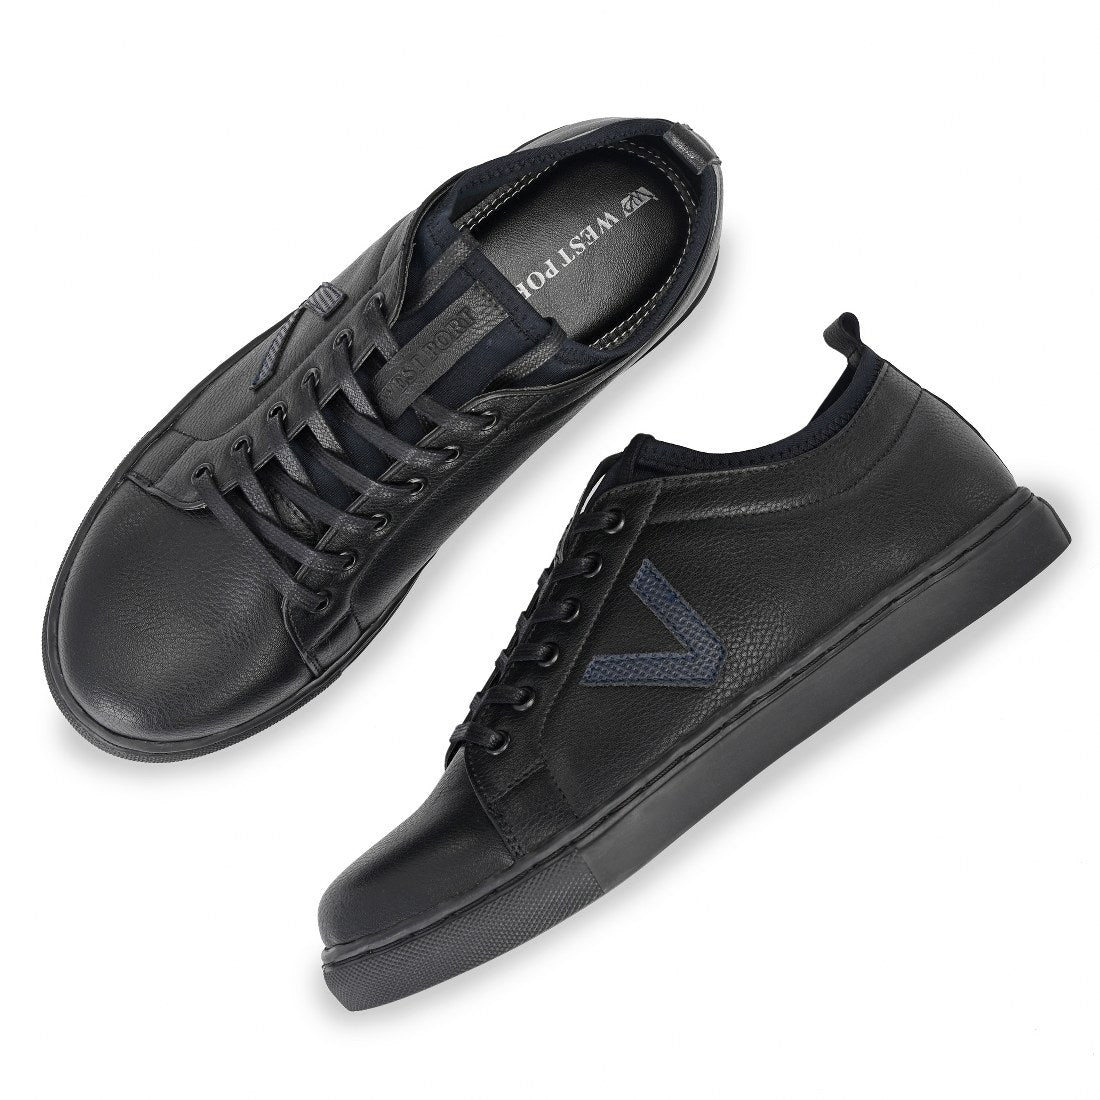 FUN-55 MEN NON-LEATHER BLACK CASUAL LACE UP SNEAKERS